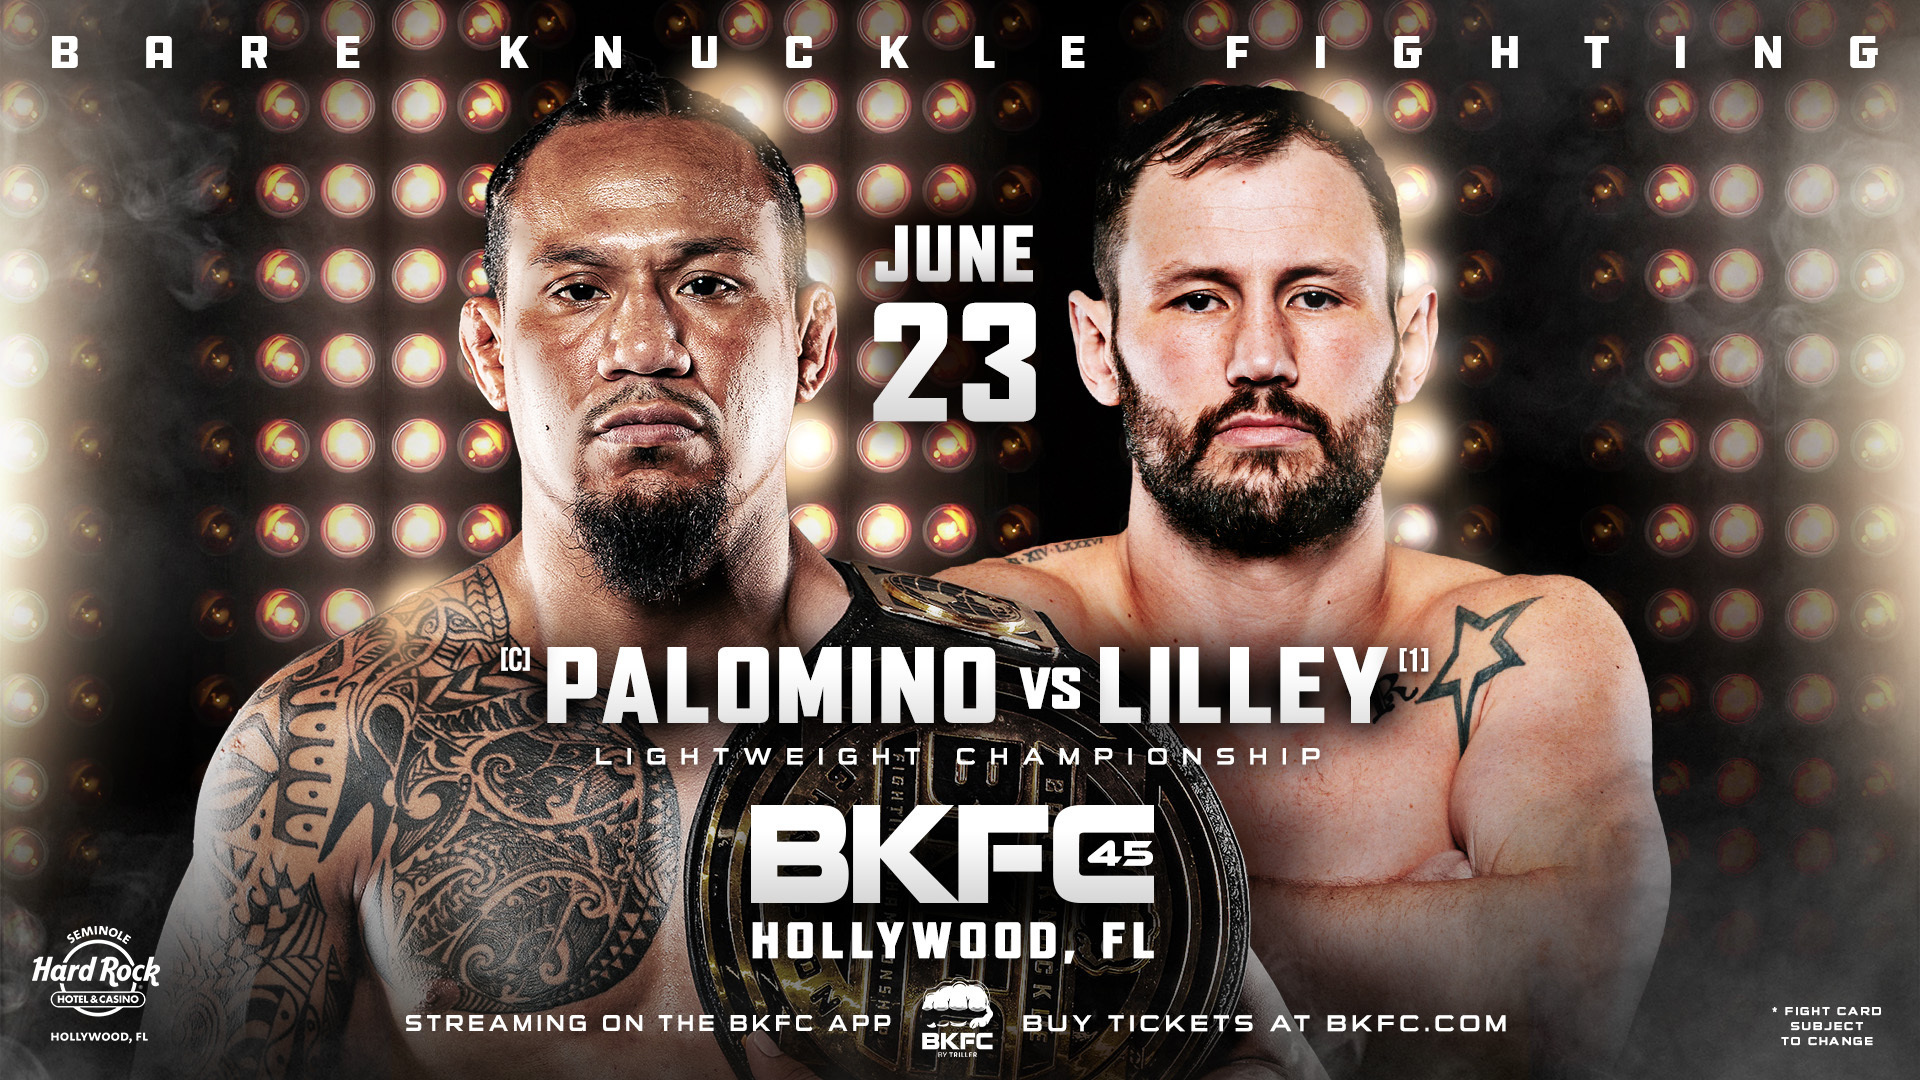 Luis Palomino defends his BKFC lightweight championship tonight against James Lilley